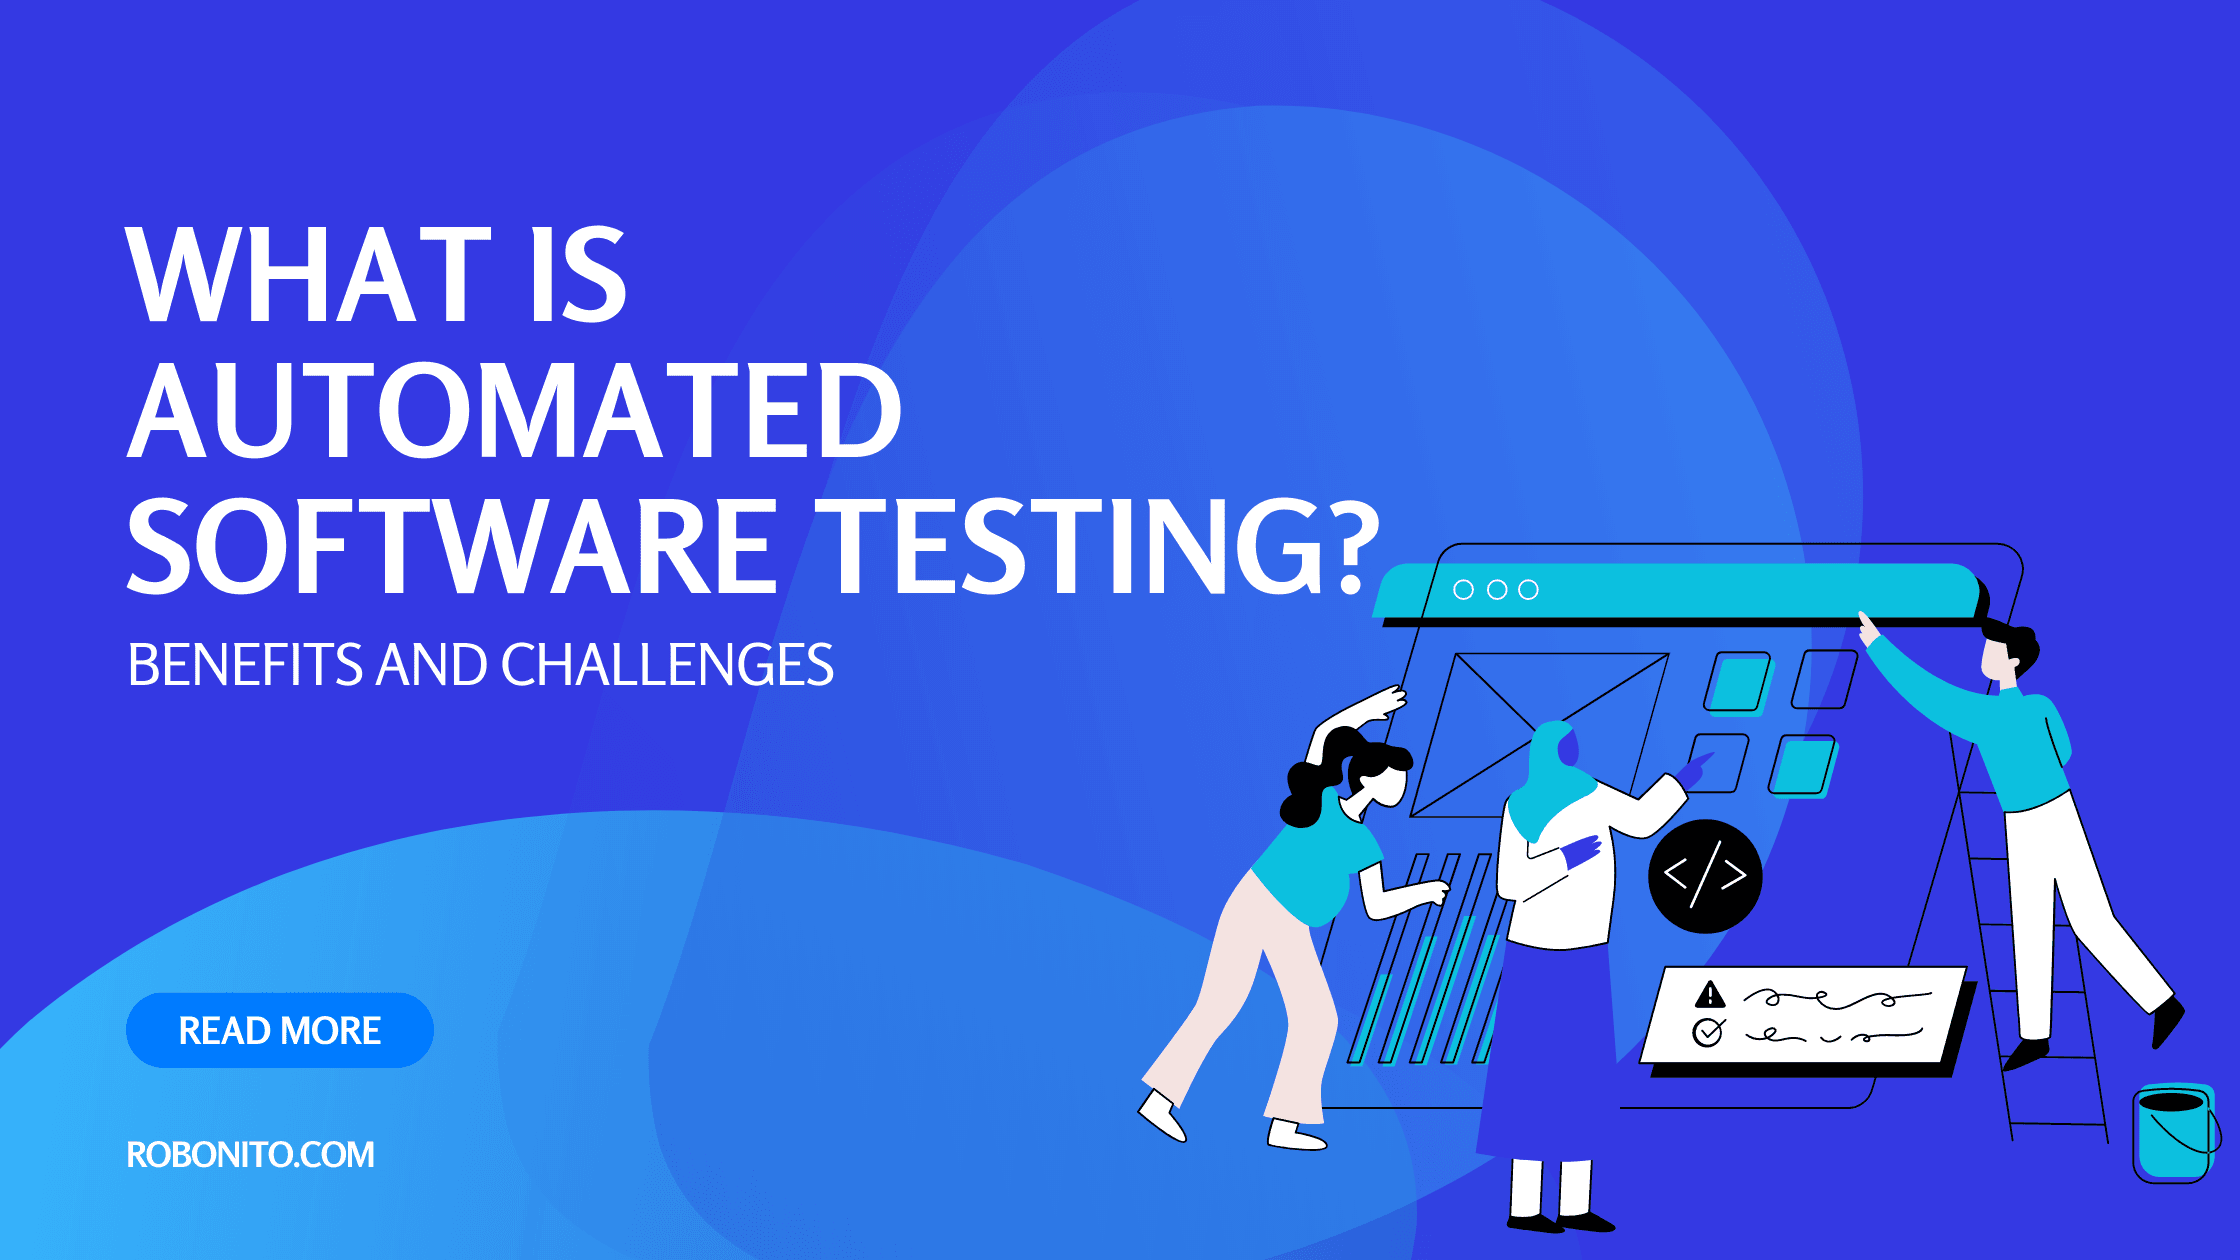 What Is Automated Software Testing?